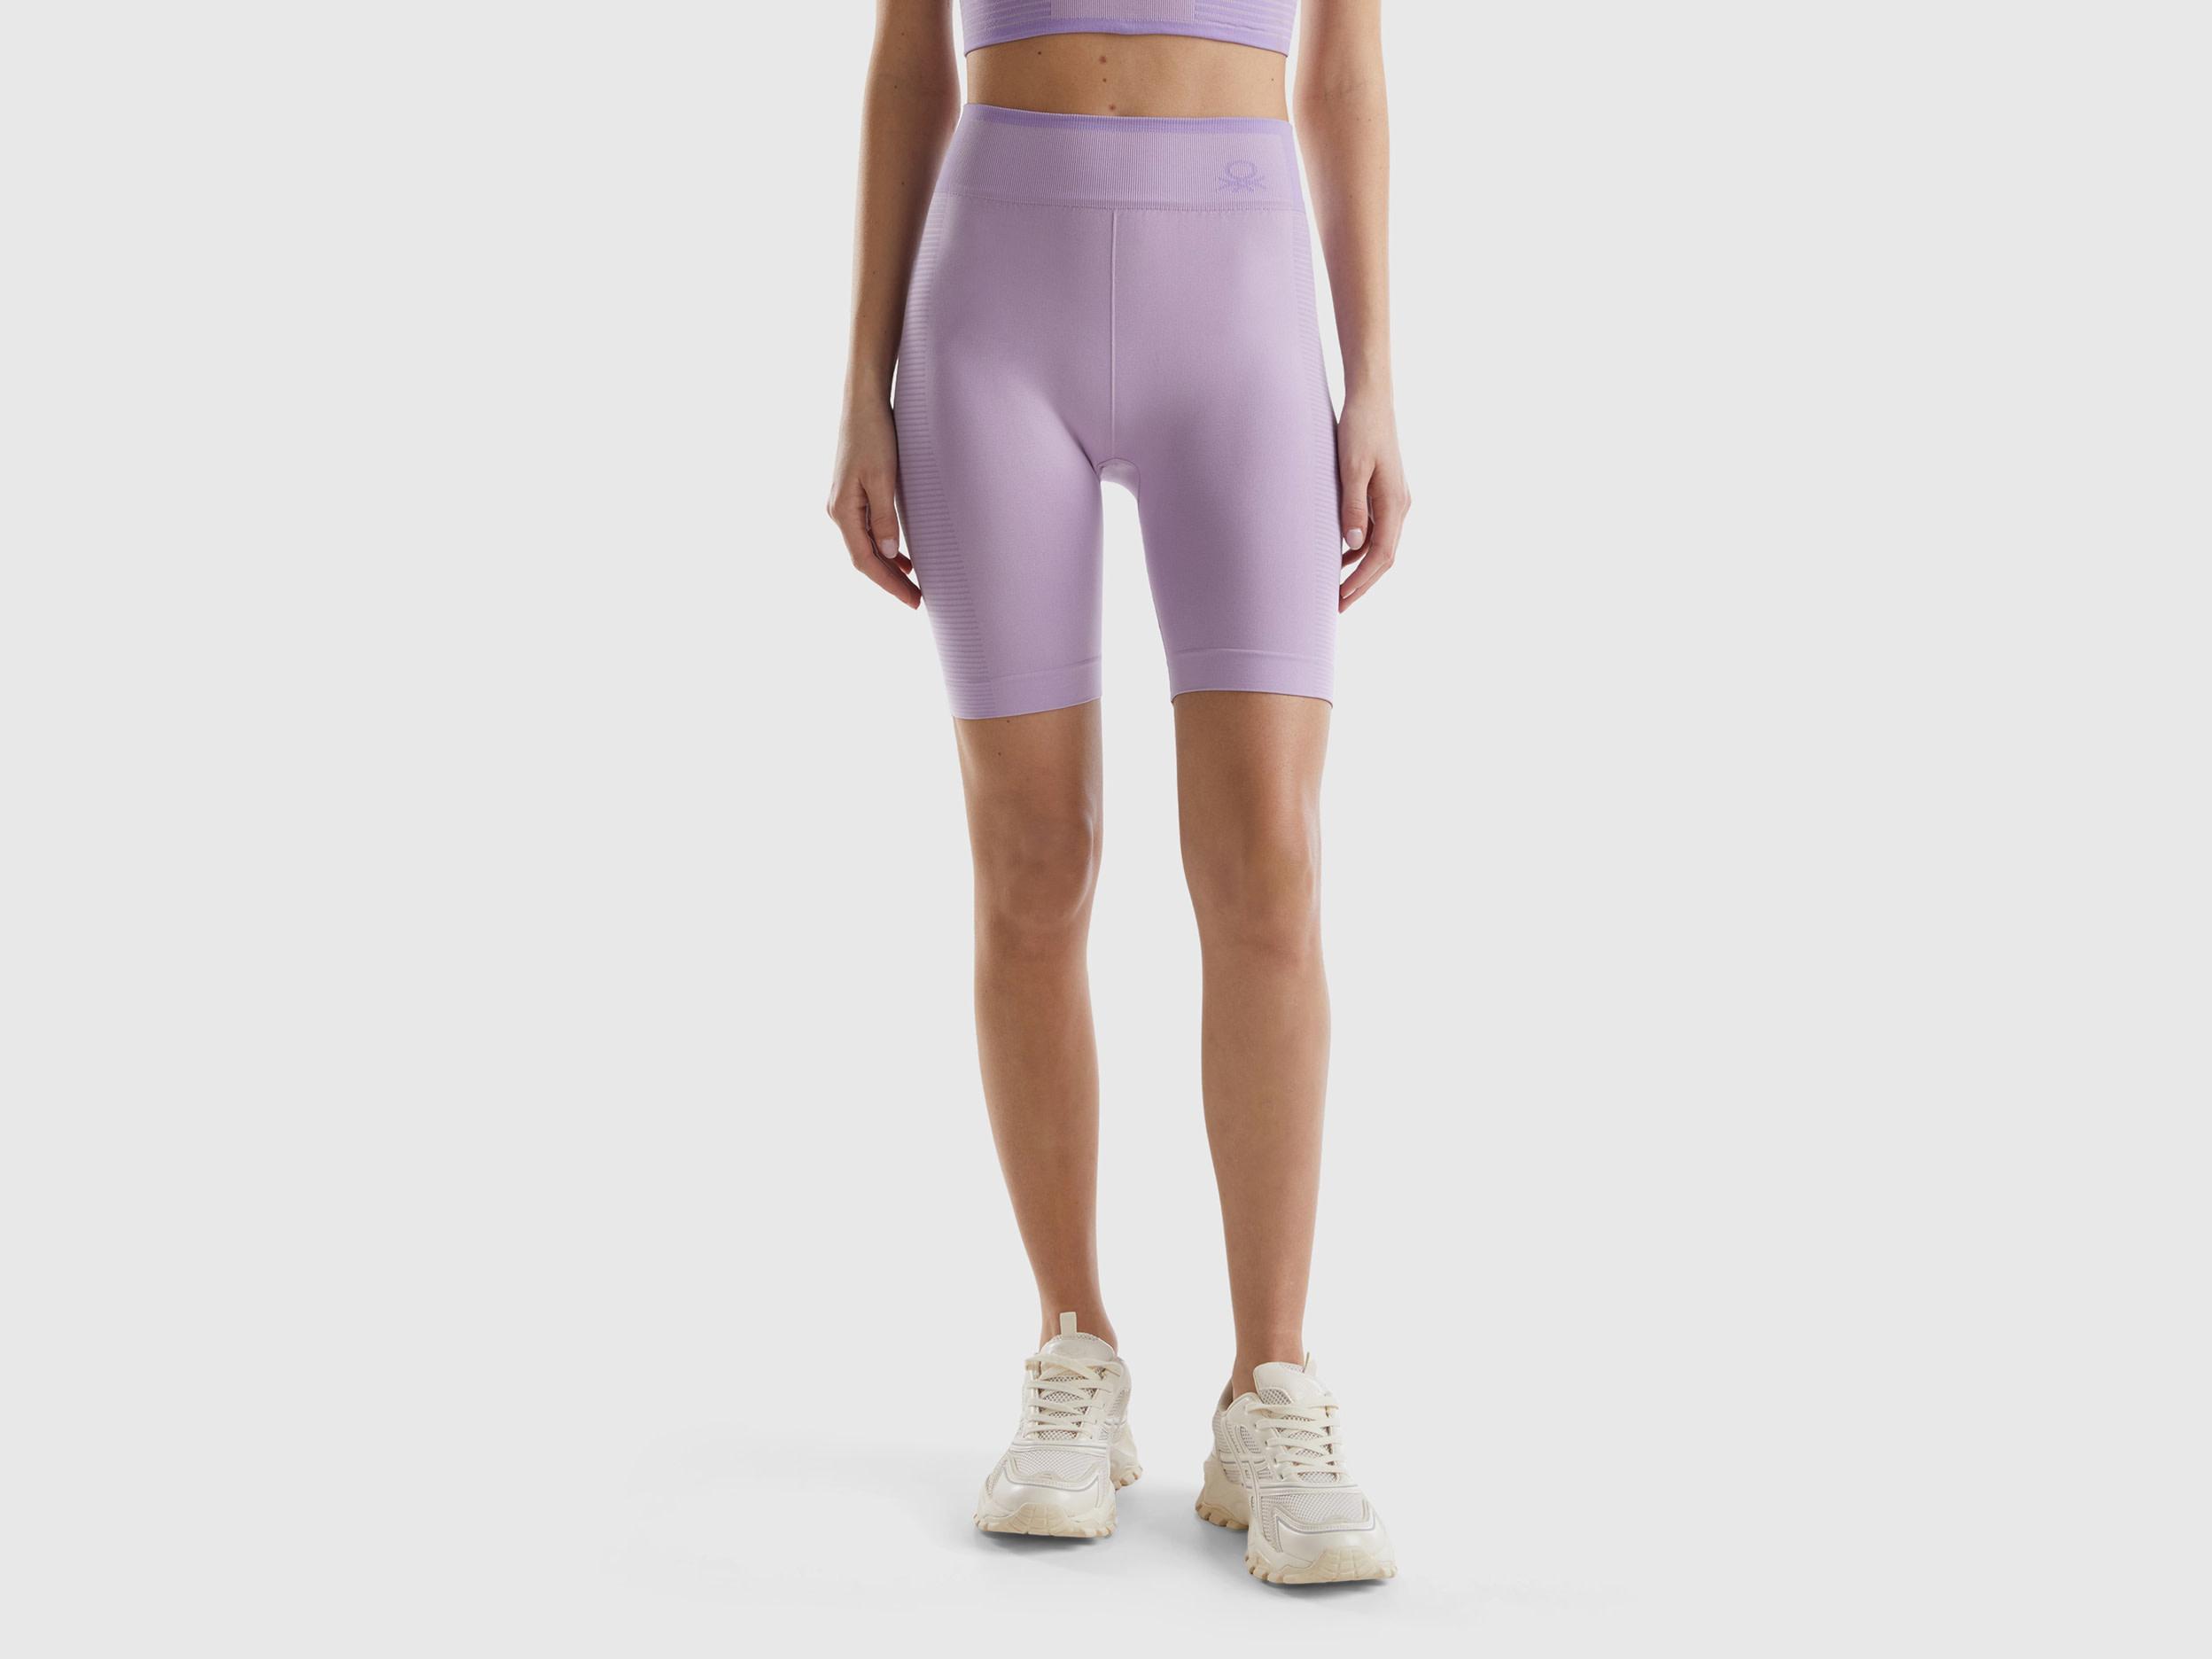 Image of Benetton, Seamless Sports Cycling Leggings, size S, Lilac, Women